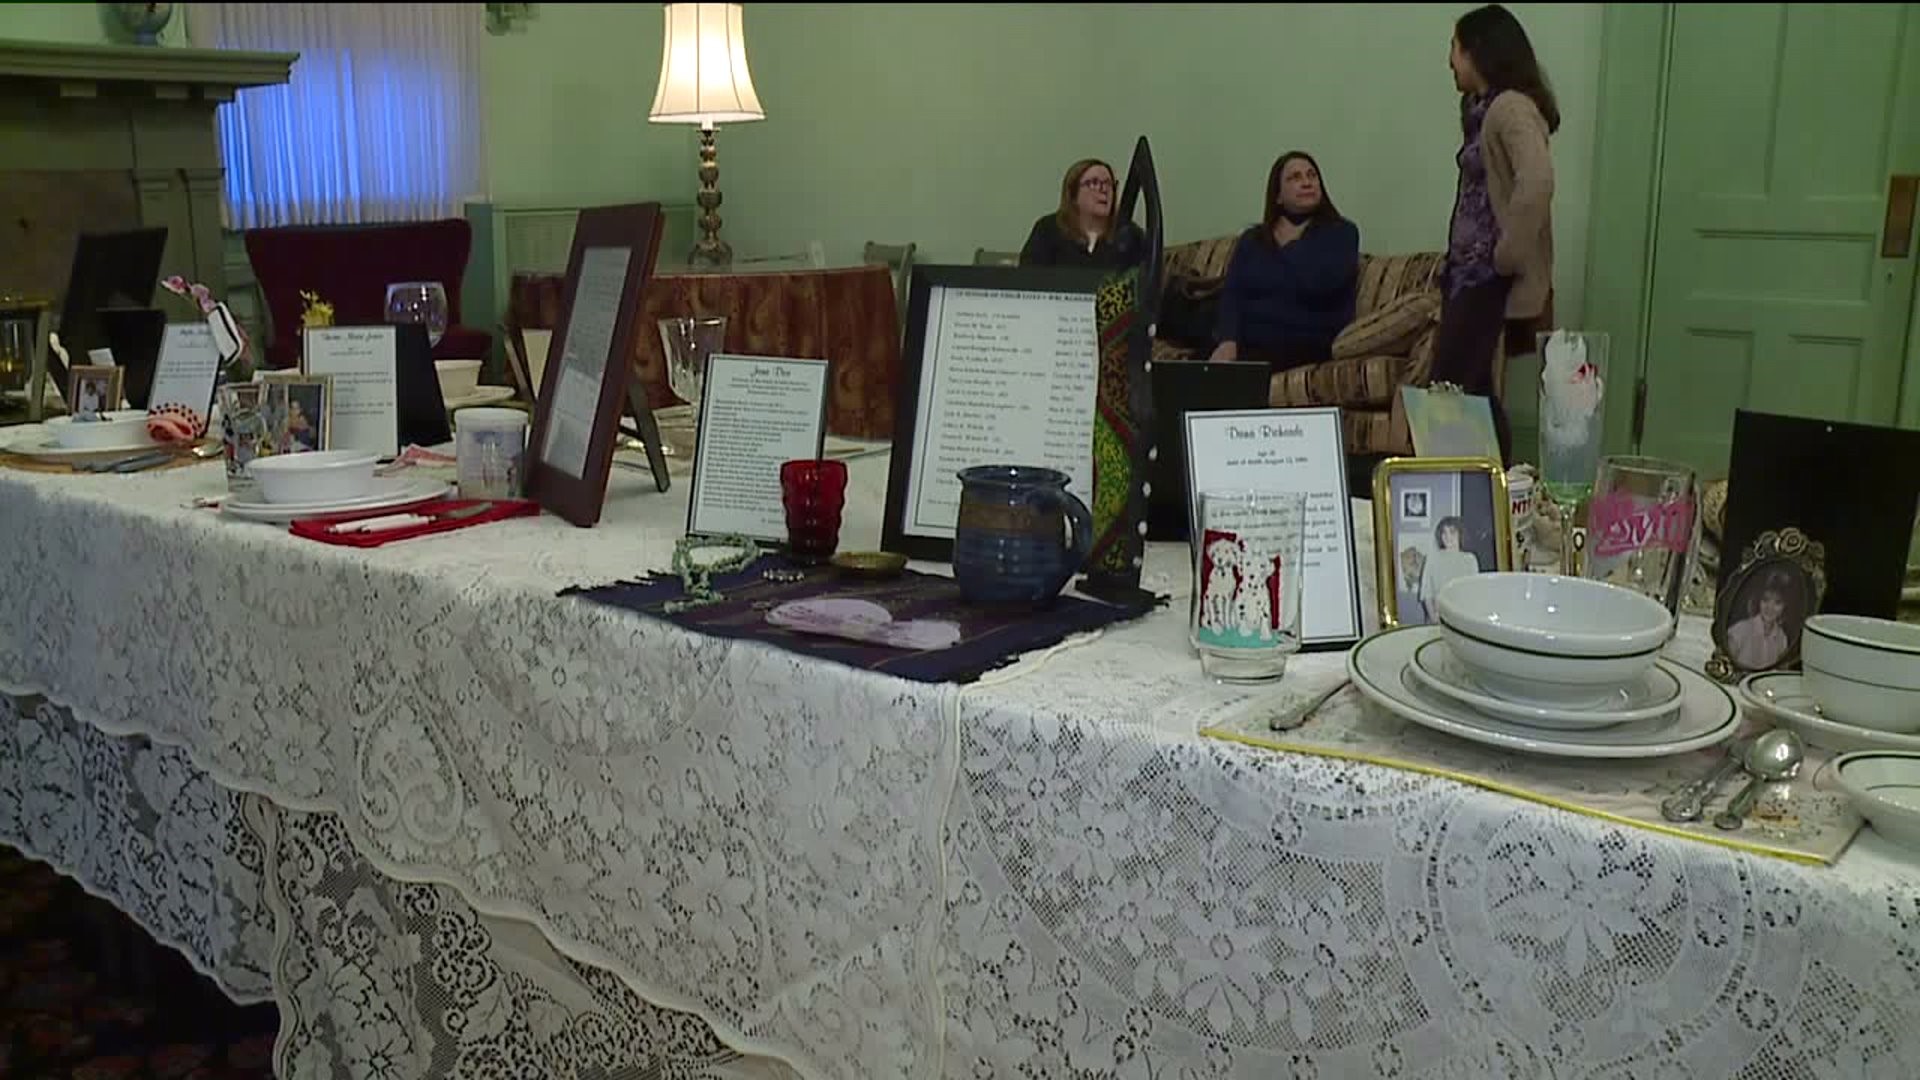 Annual Exhibit Held to Memorialize Victims of Domestic Abuse